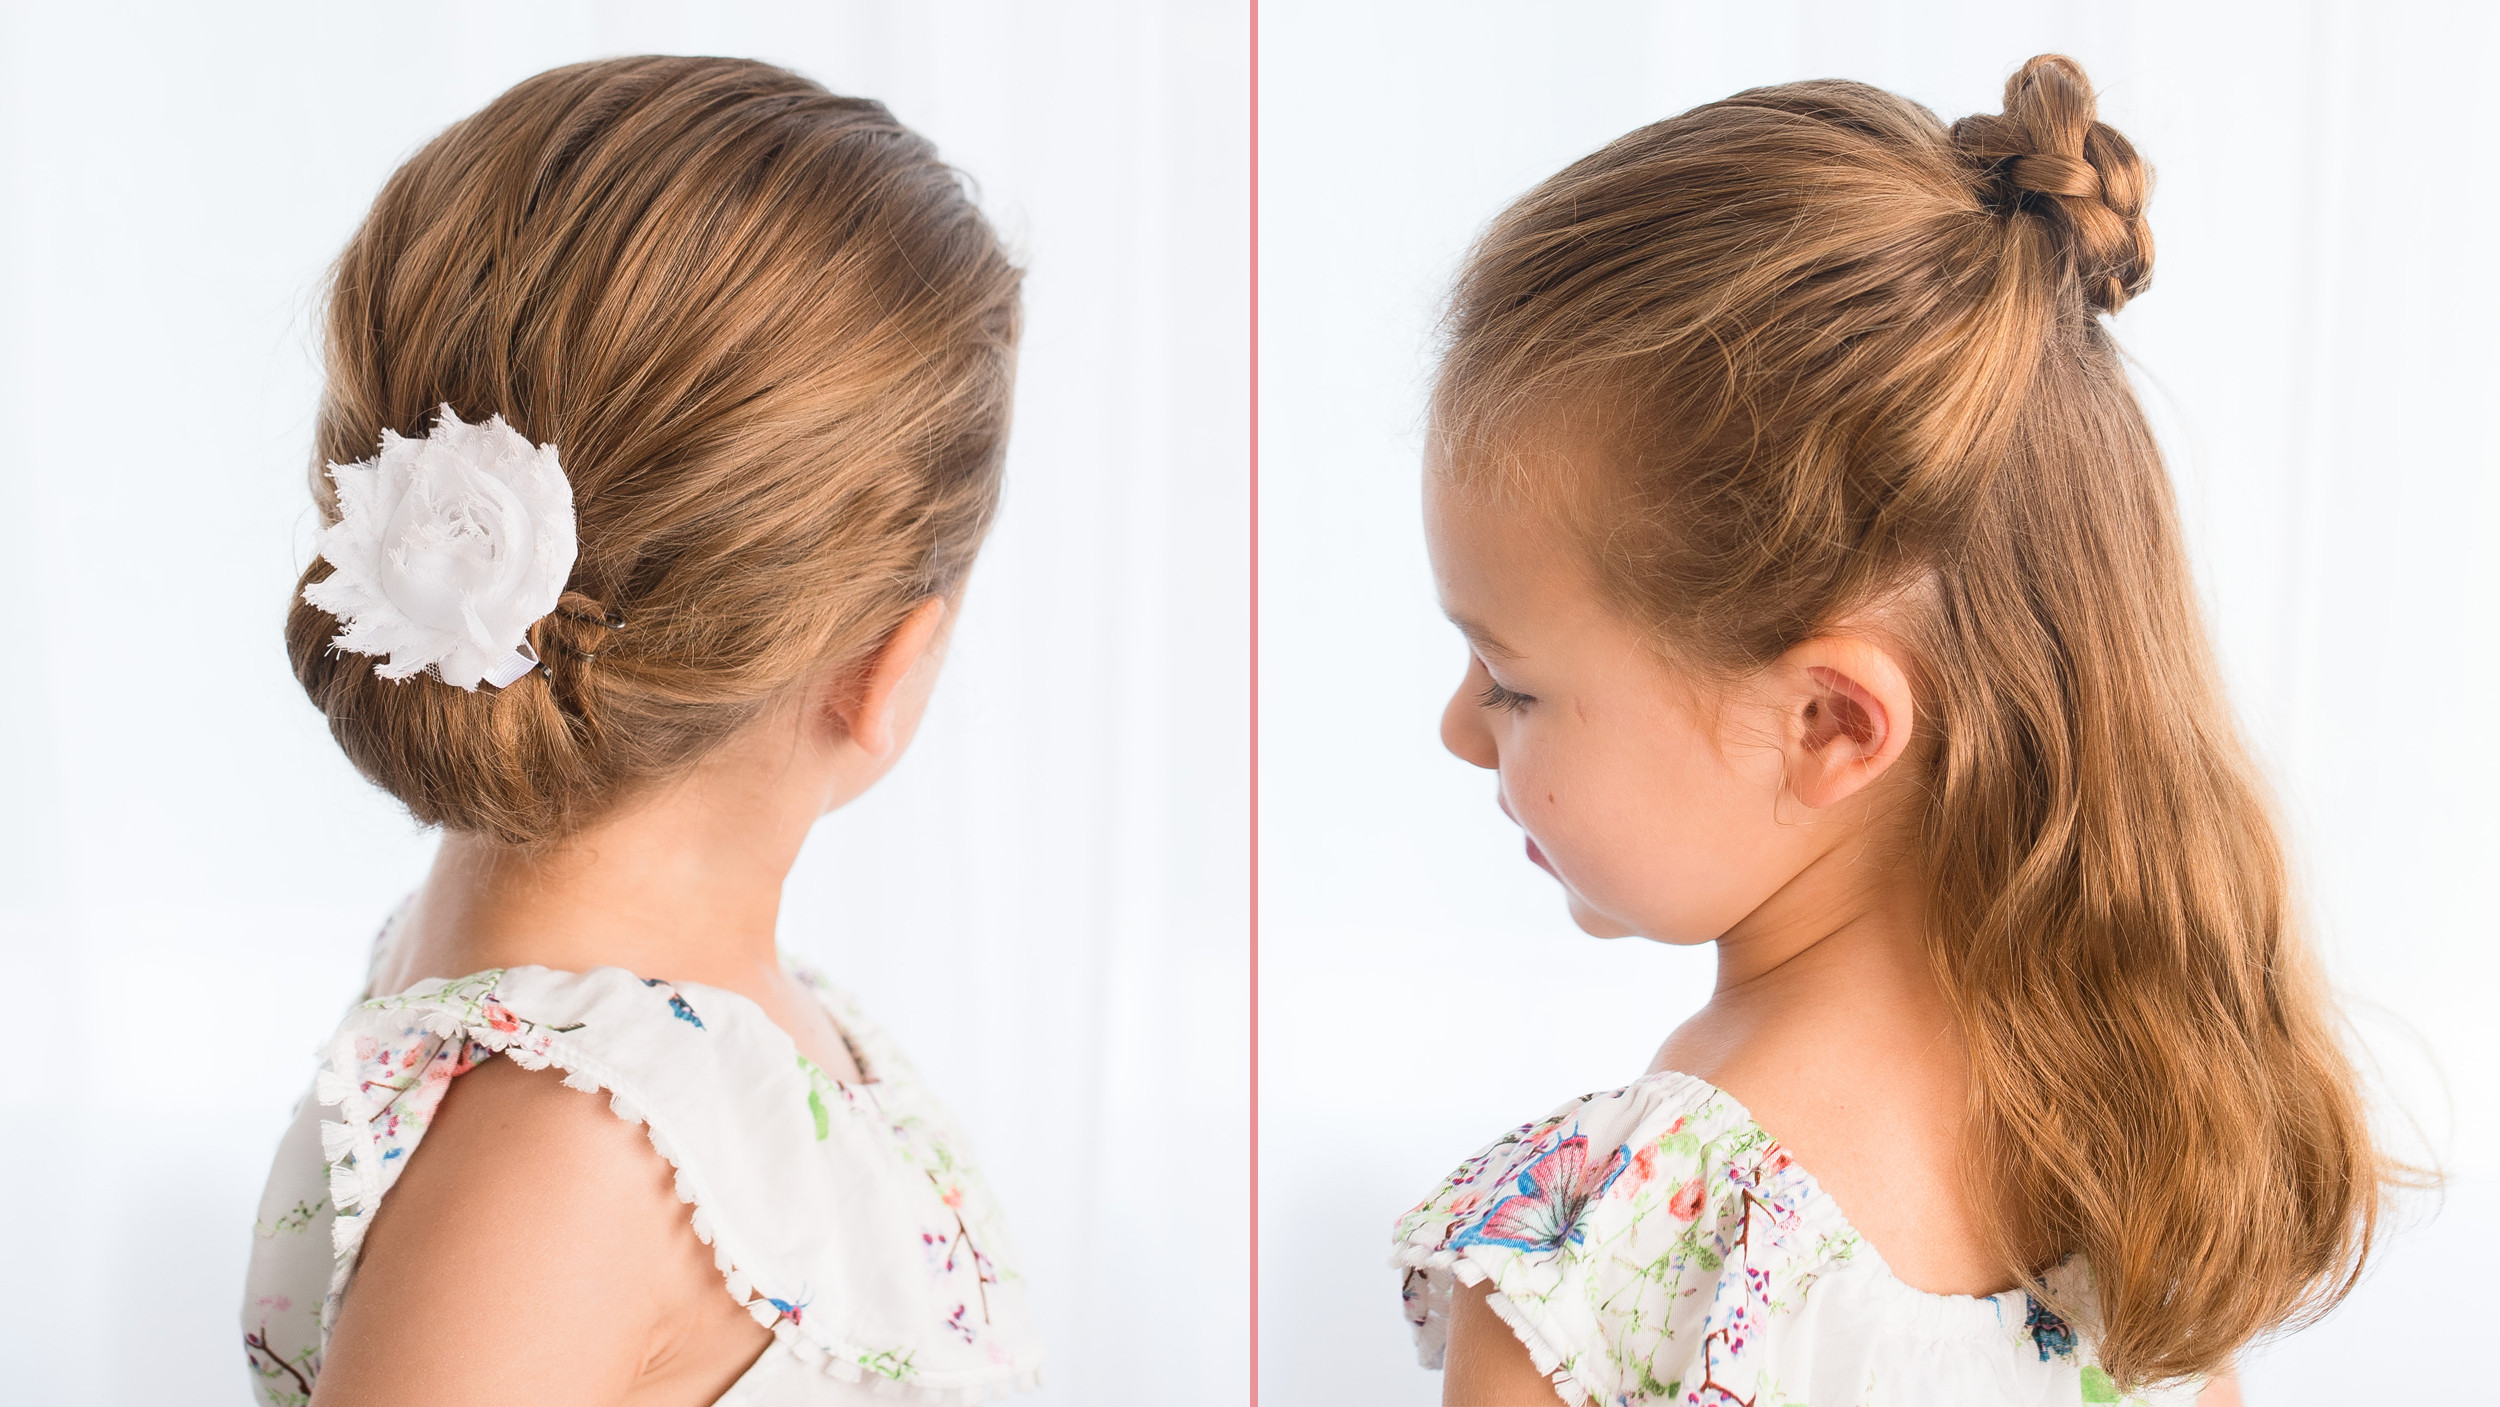 Cute Easy Hairstyles For Kids
 Easy hairstyles for girls that you can create in minutes